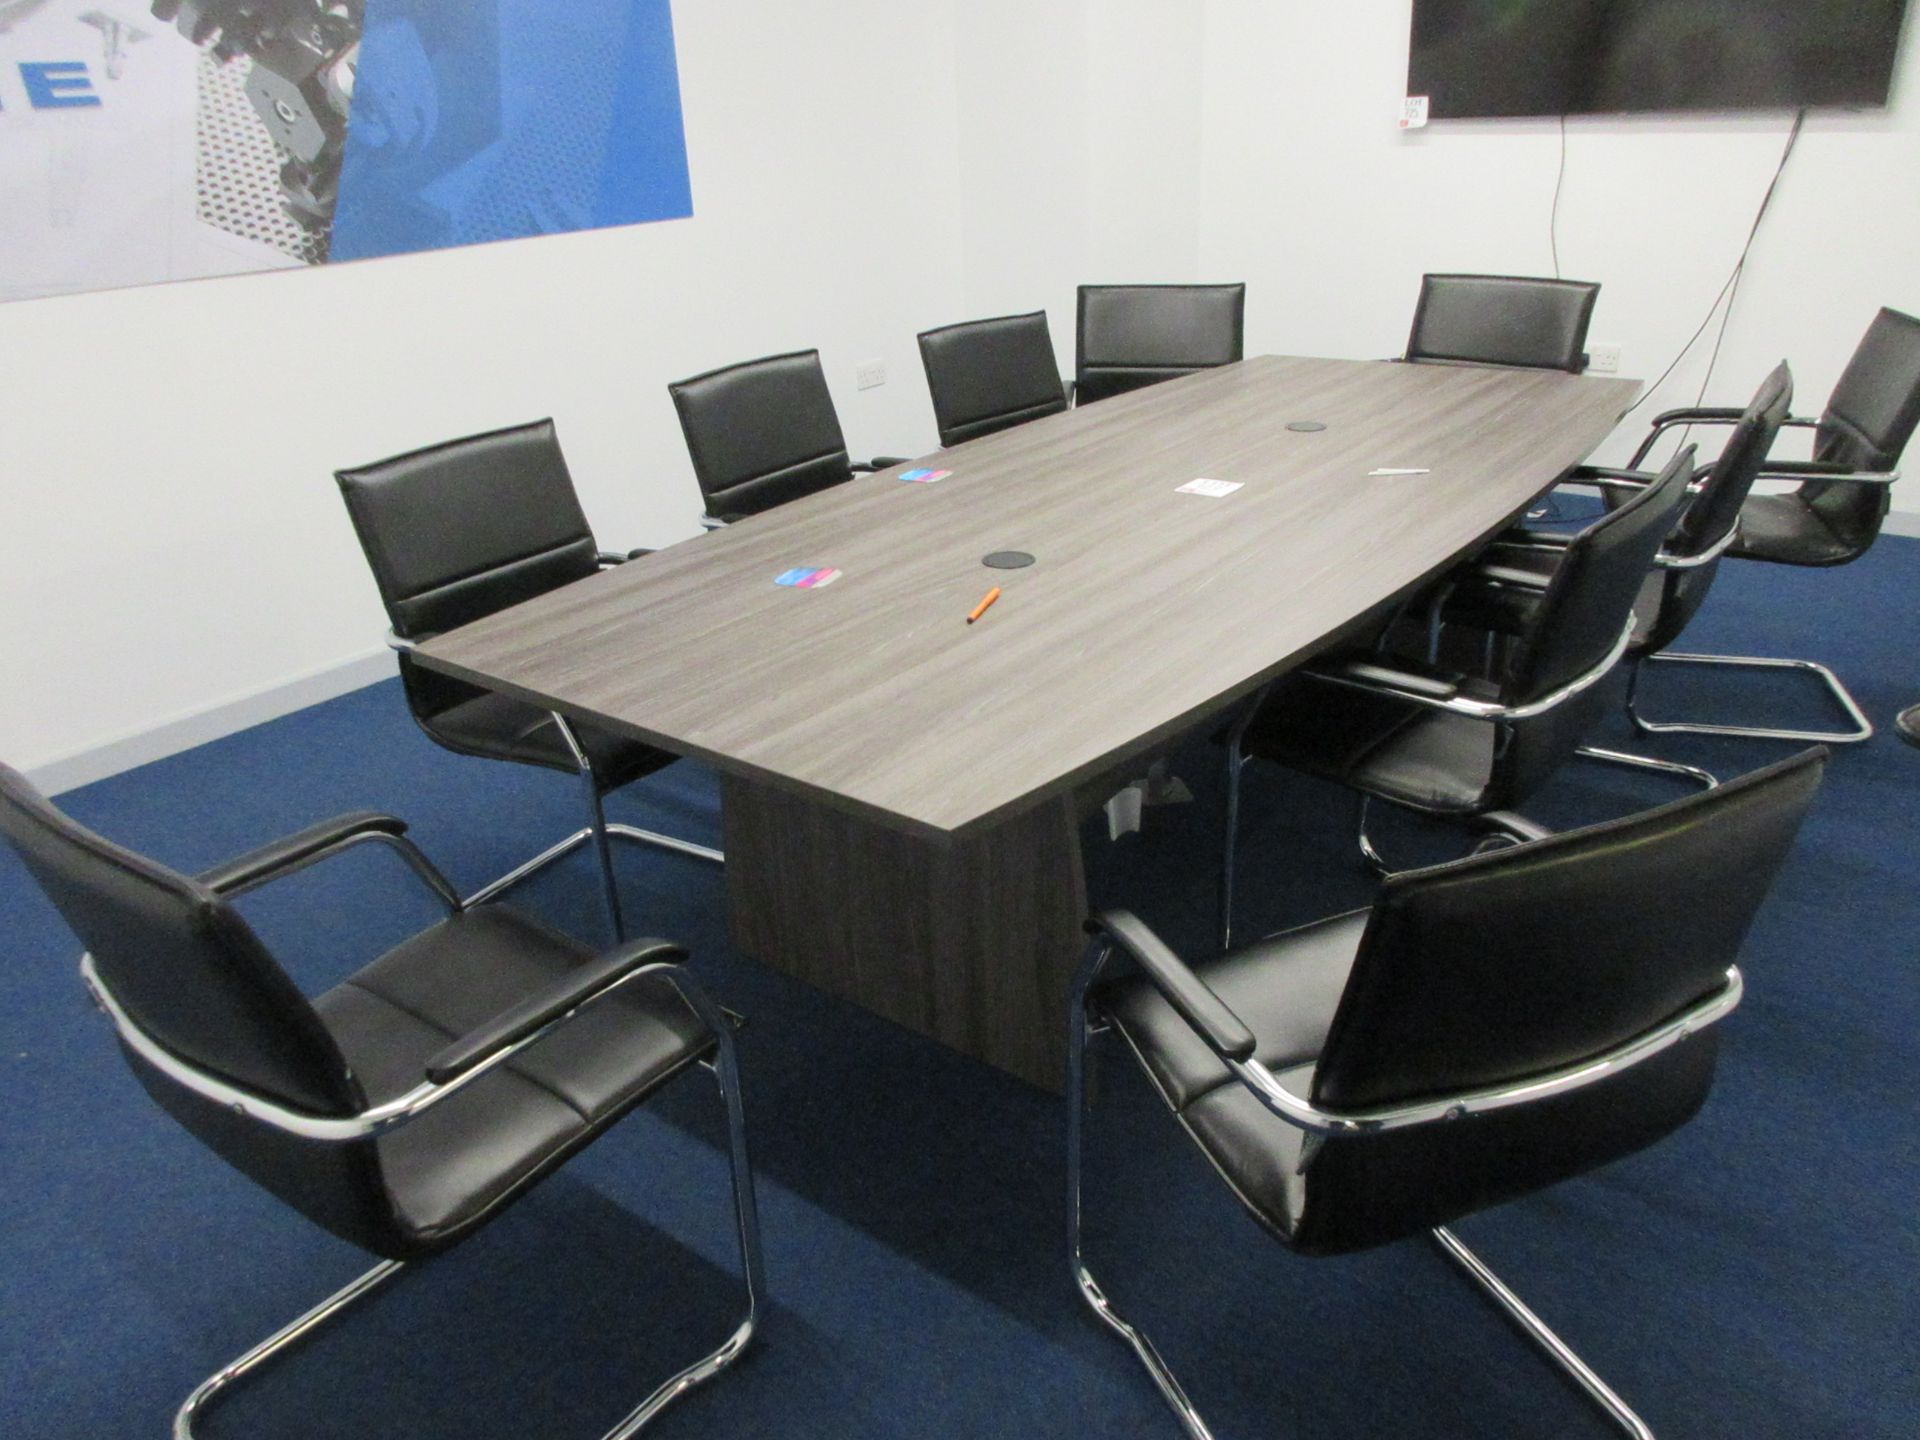 Dark wood effect boardroom table, 10 black leather effect chairs